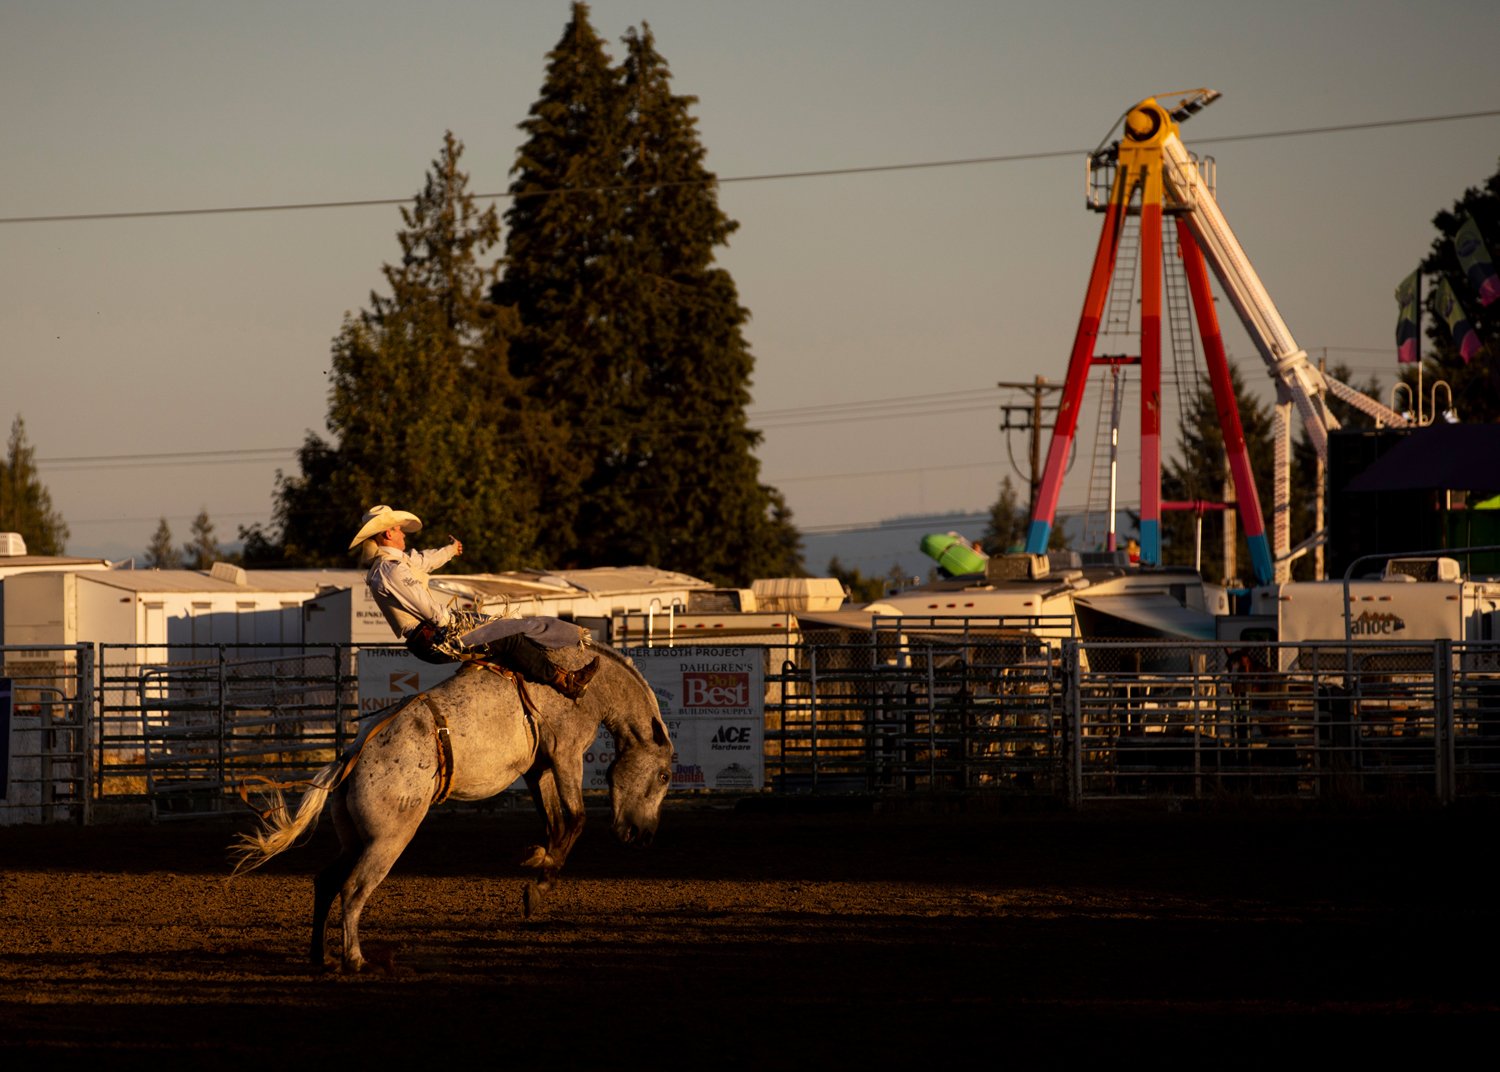  A rider competes in the bareback bronco riding event Saturday during the Columbia County Fair and Rodeo in St Helens, Ore. 